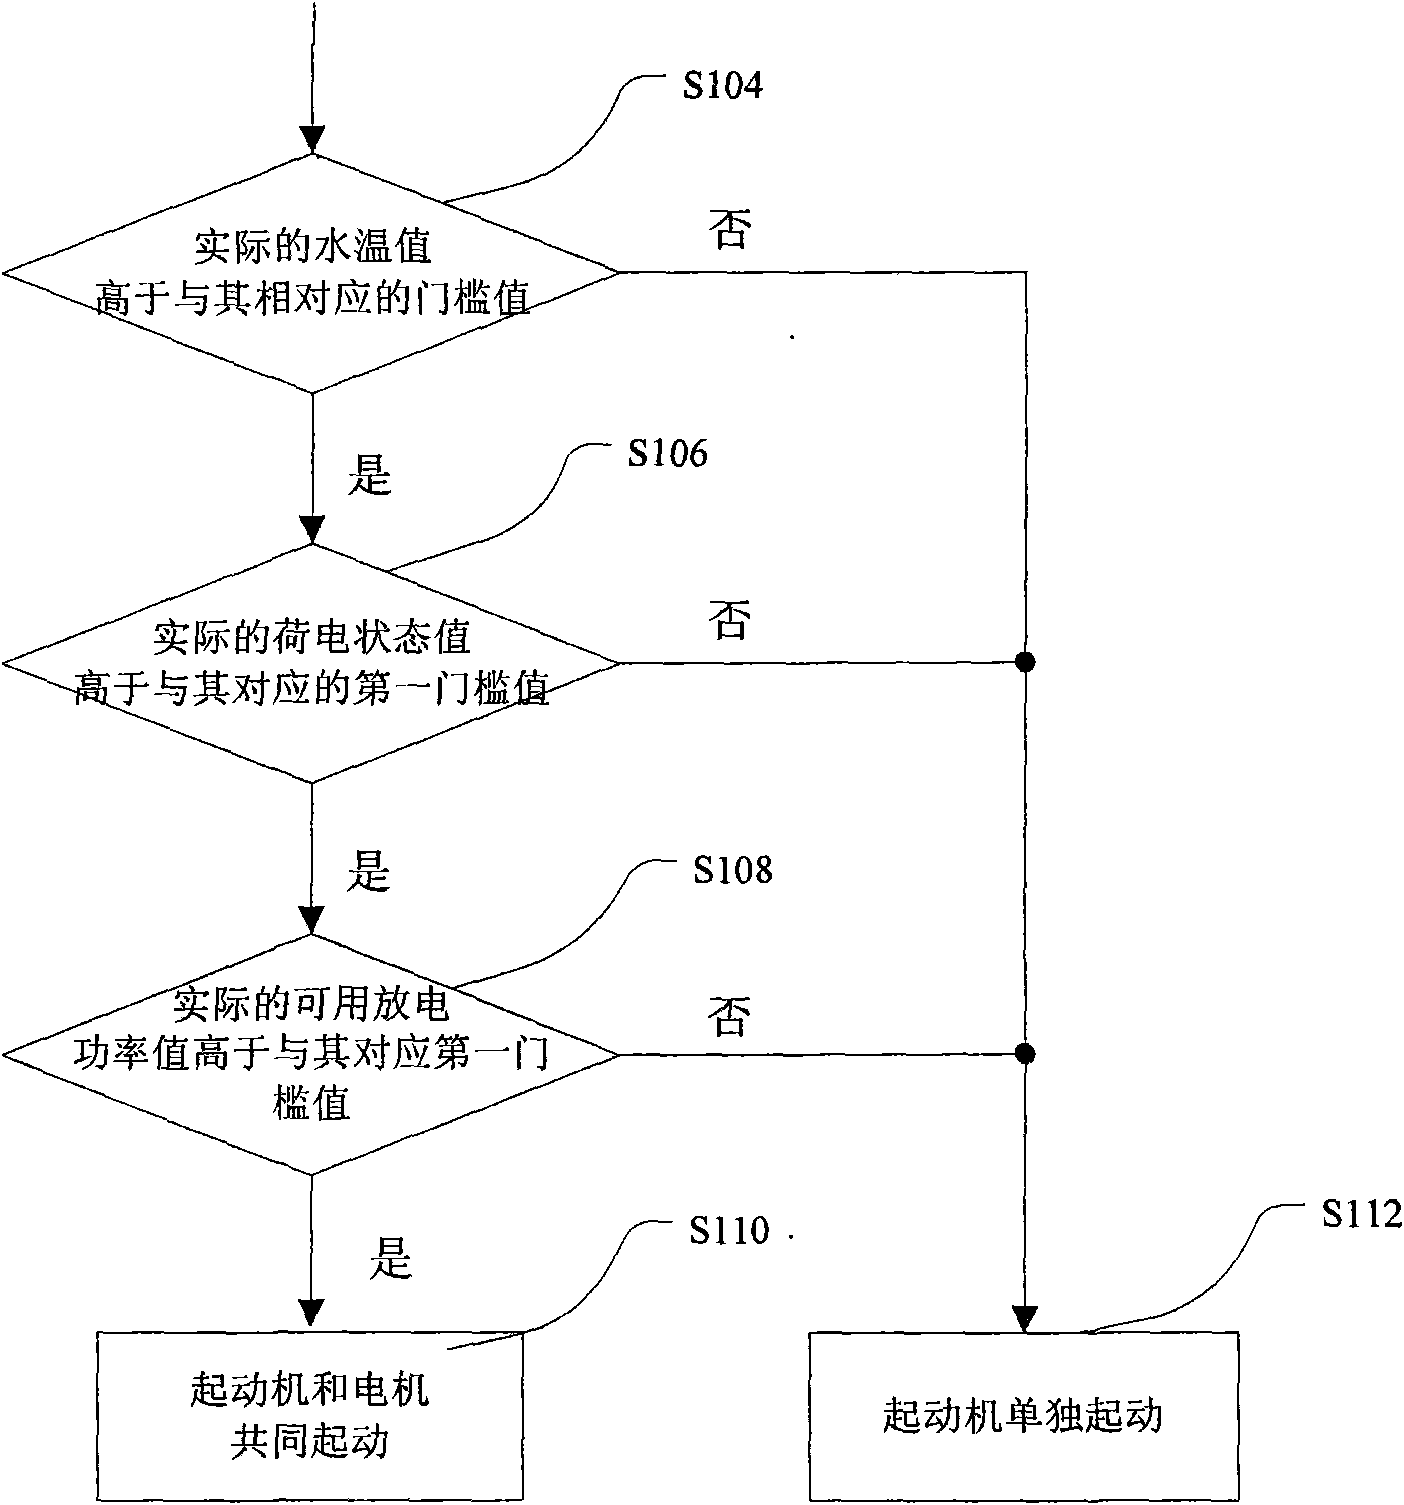 Control method of cold start of hybrid power system